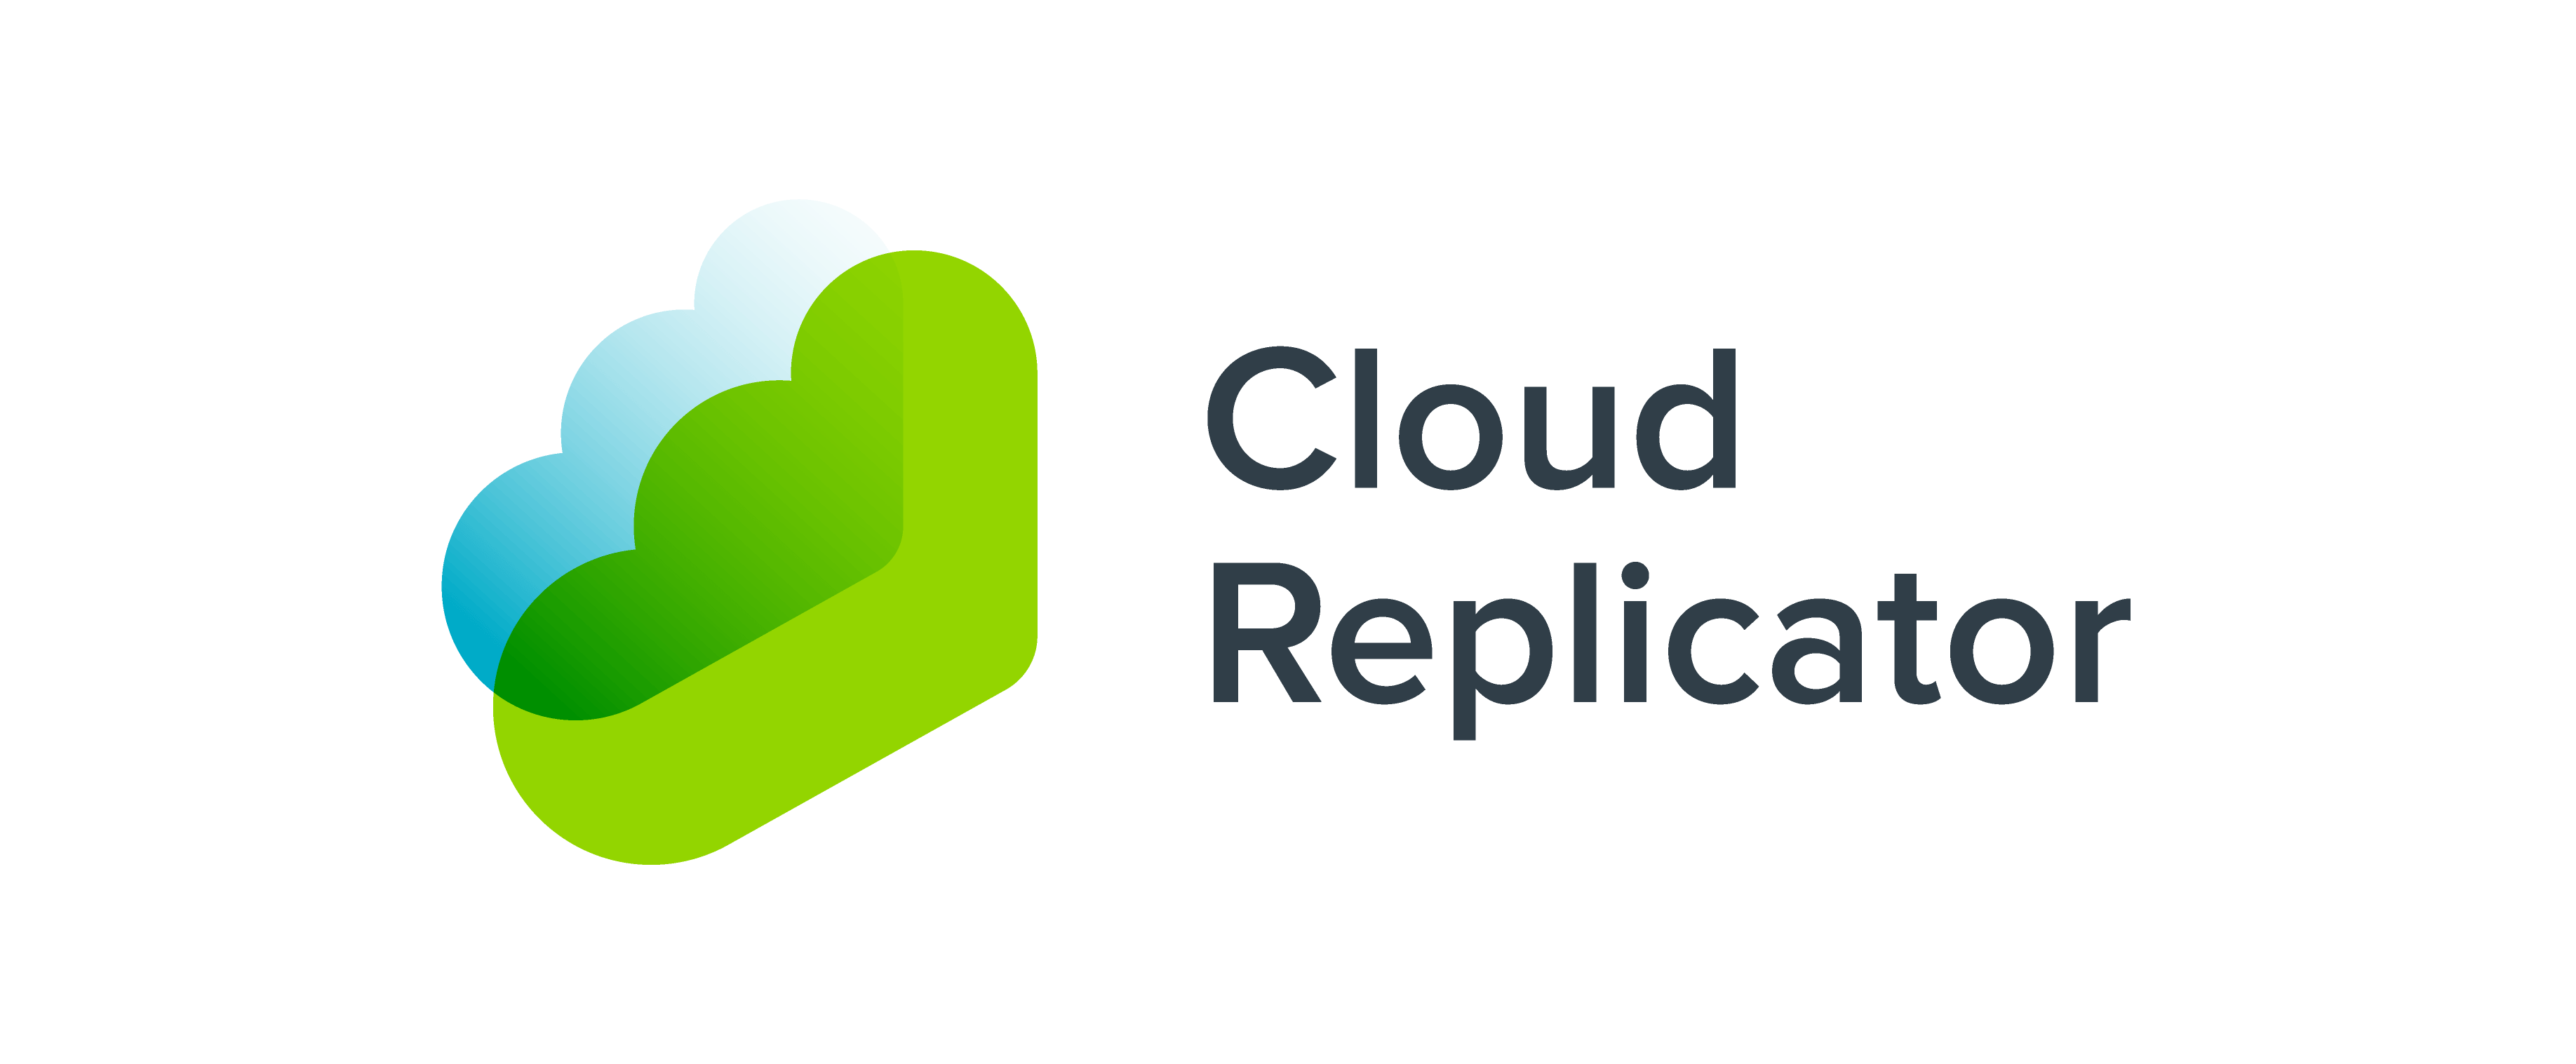 cloud replicator app for dynamics 365 business central